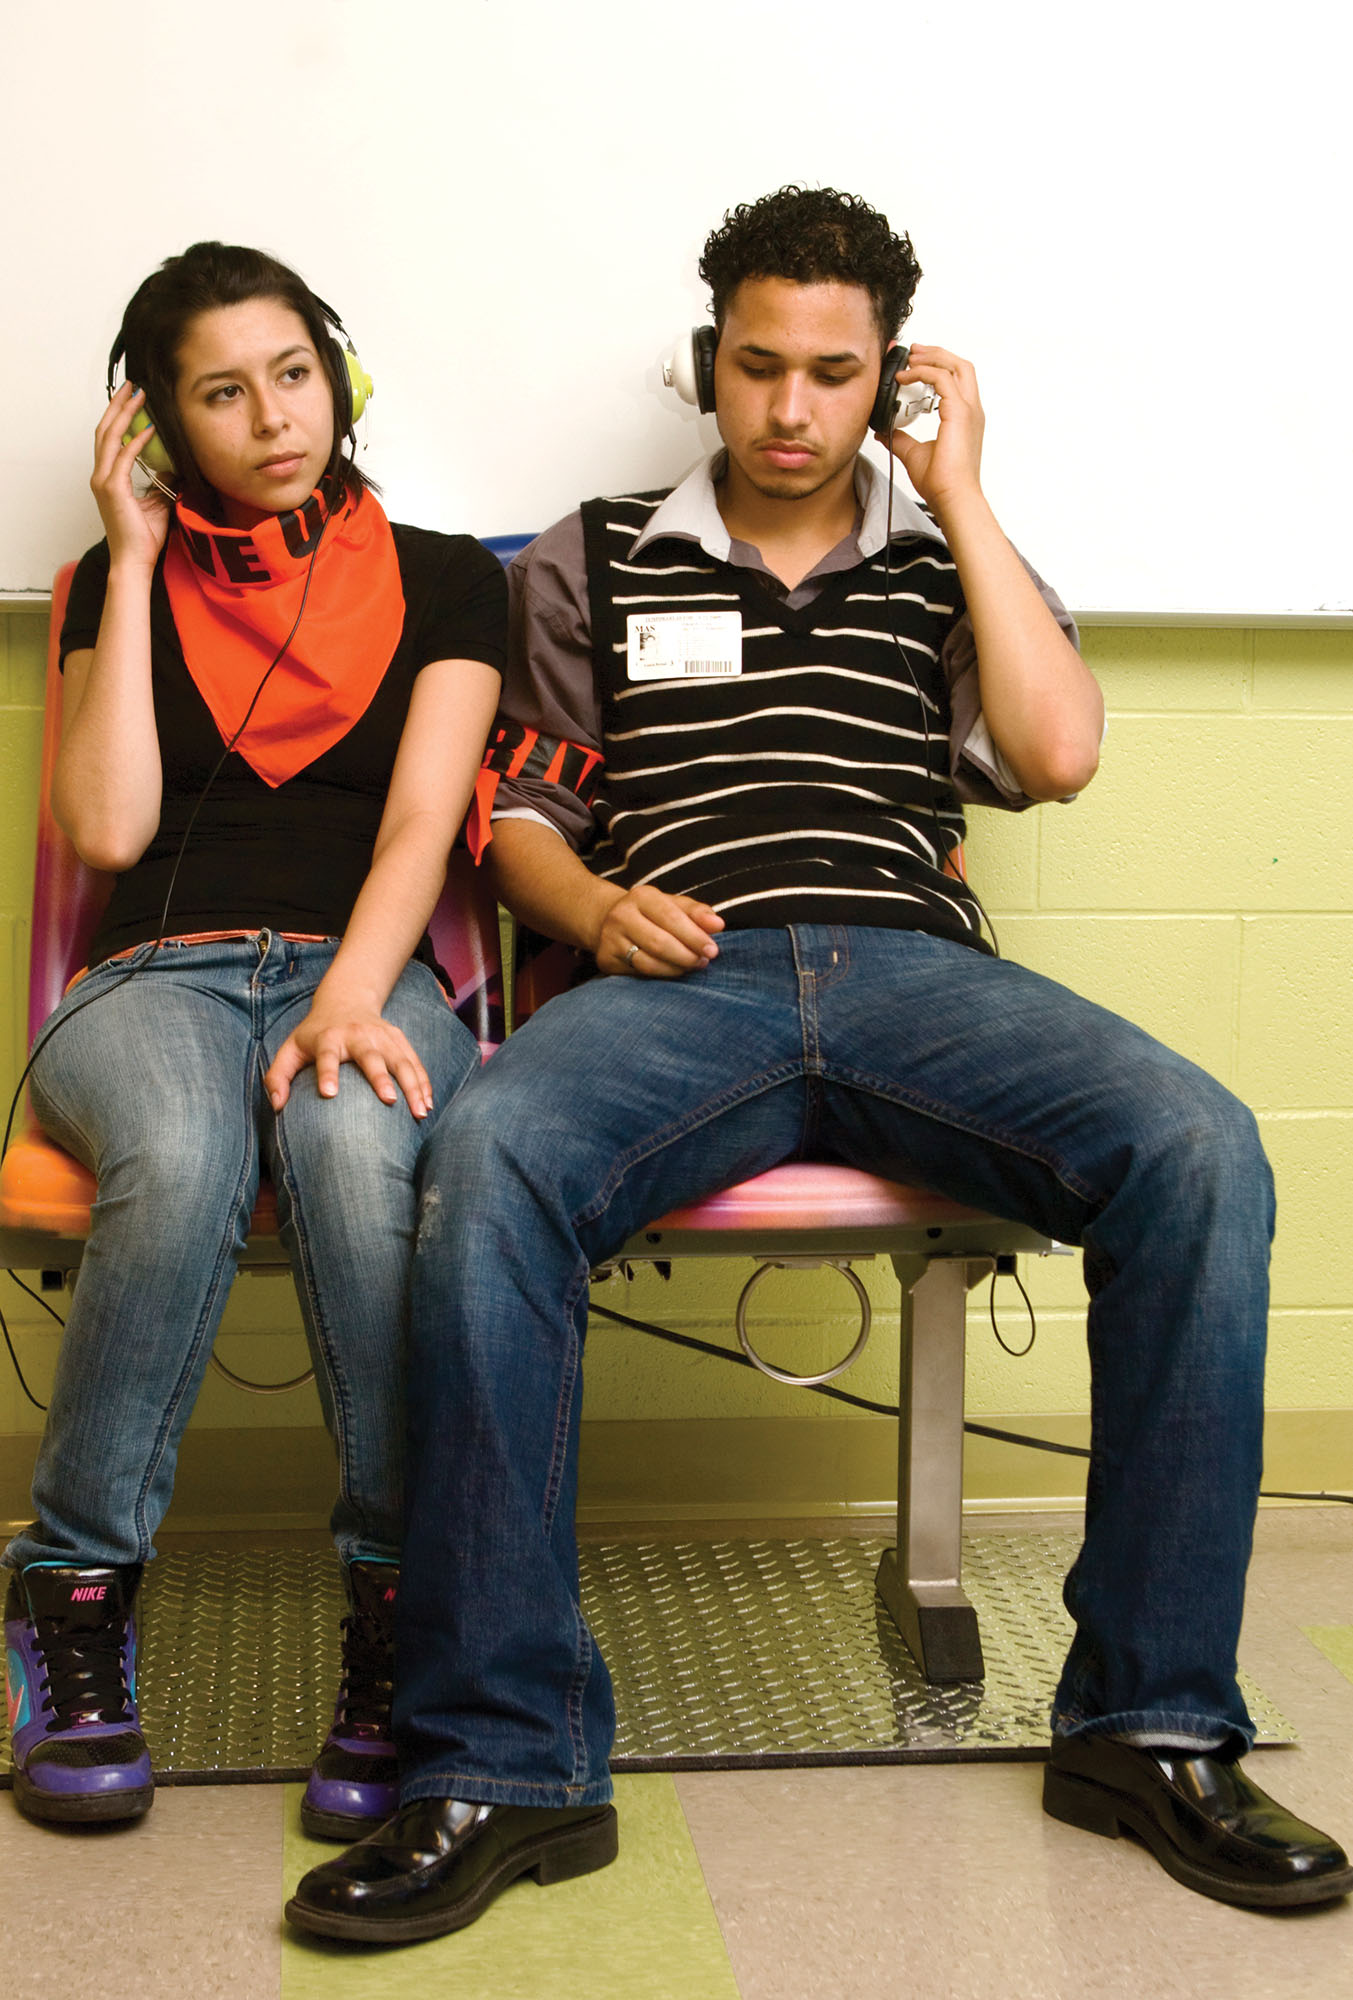 A young woman and man seated next to each other against a bright green wall, both listening to music through headphones